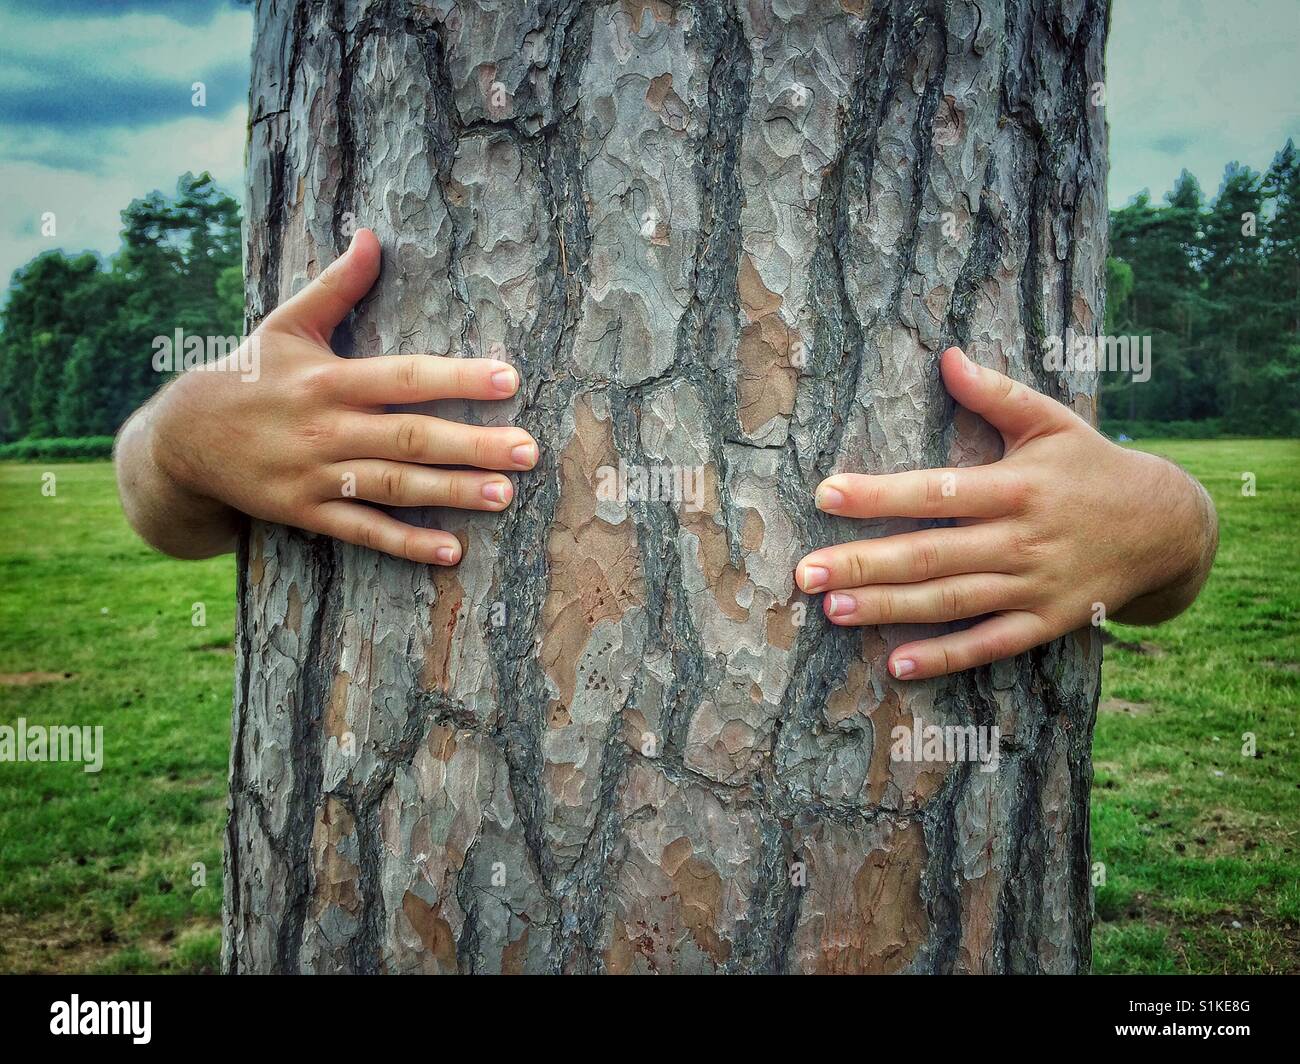 A pair of human hands wrapped around the trunk of a tree as if the tree has its own hands. Stock Photo